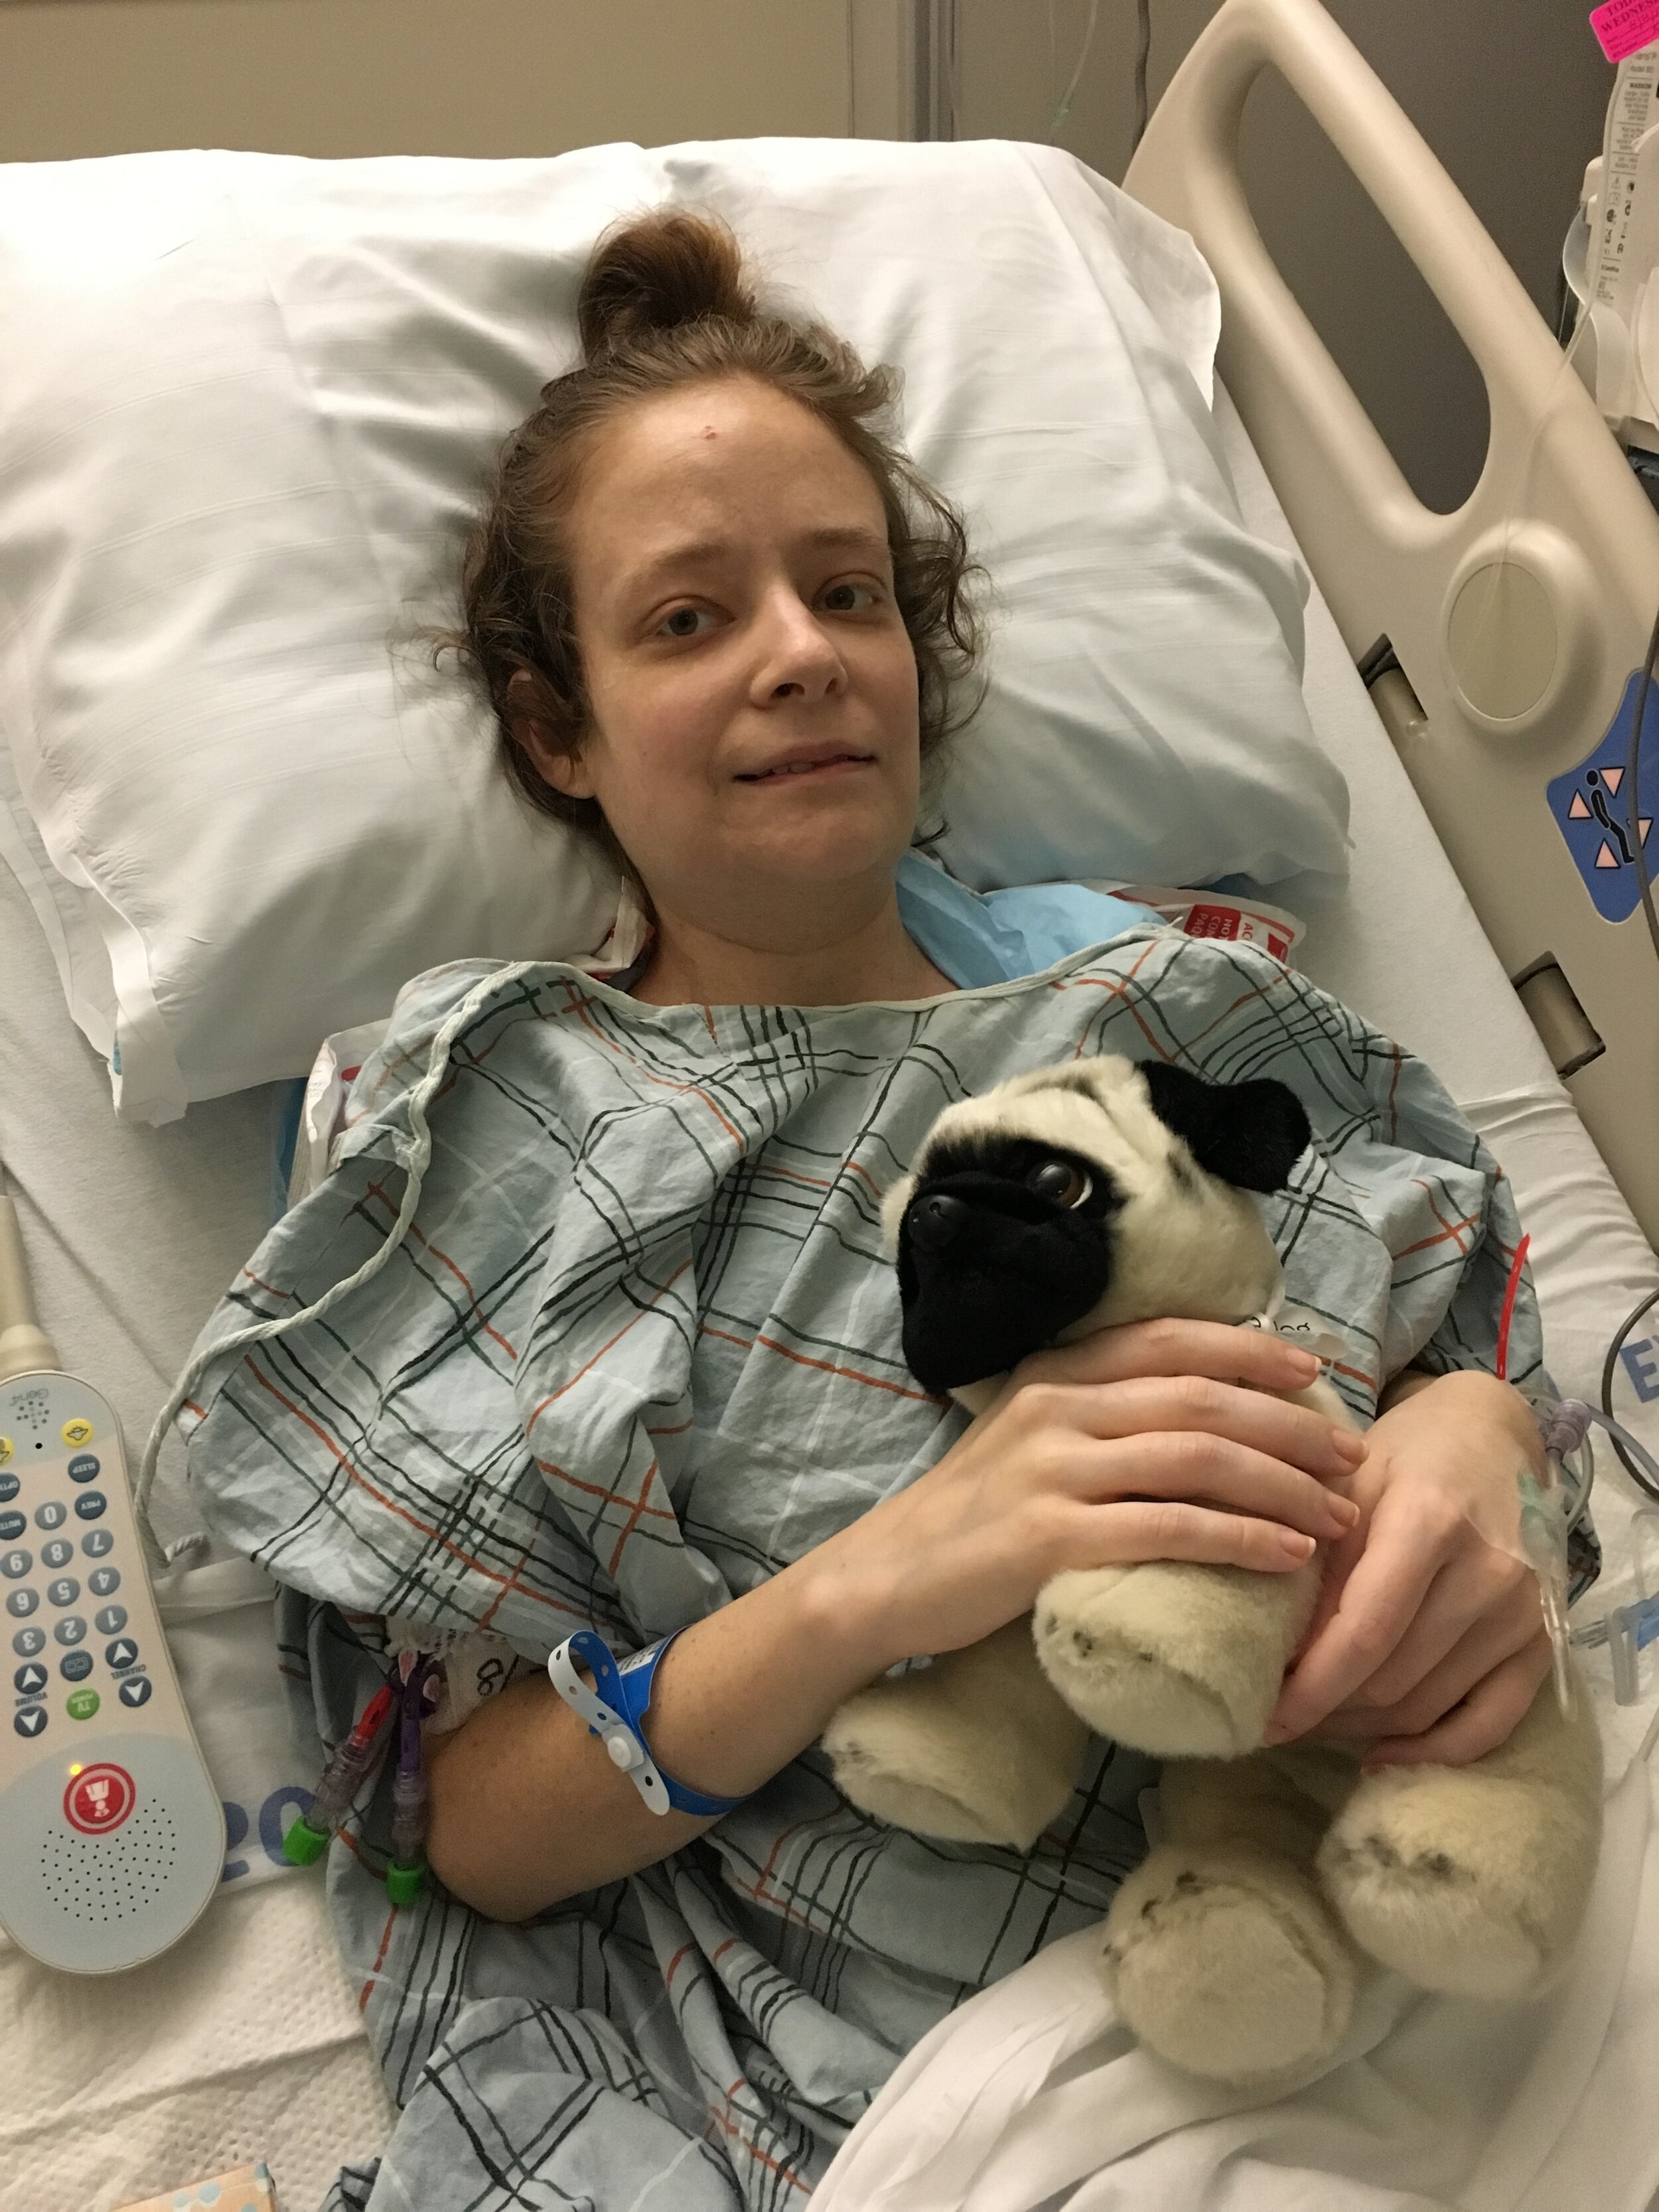 The blogger sits in a hospital bed holding a stuffed pug.